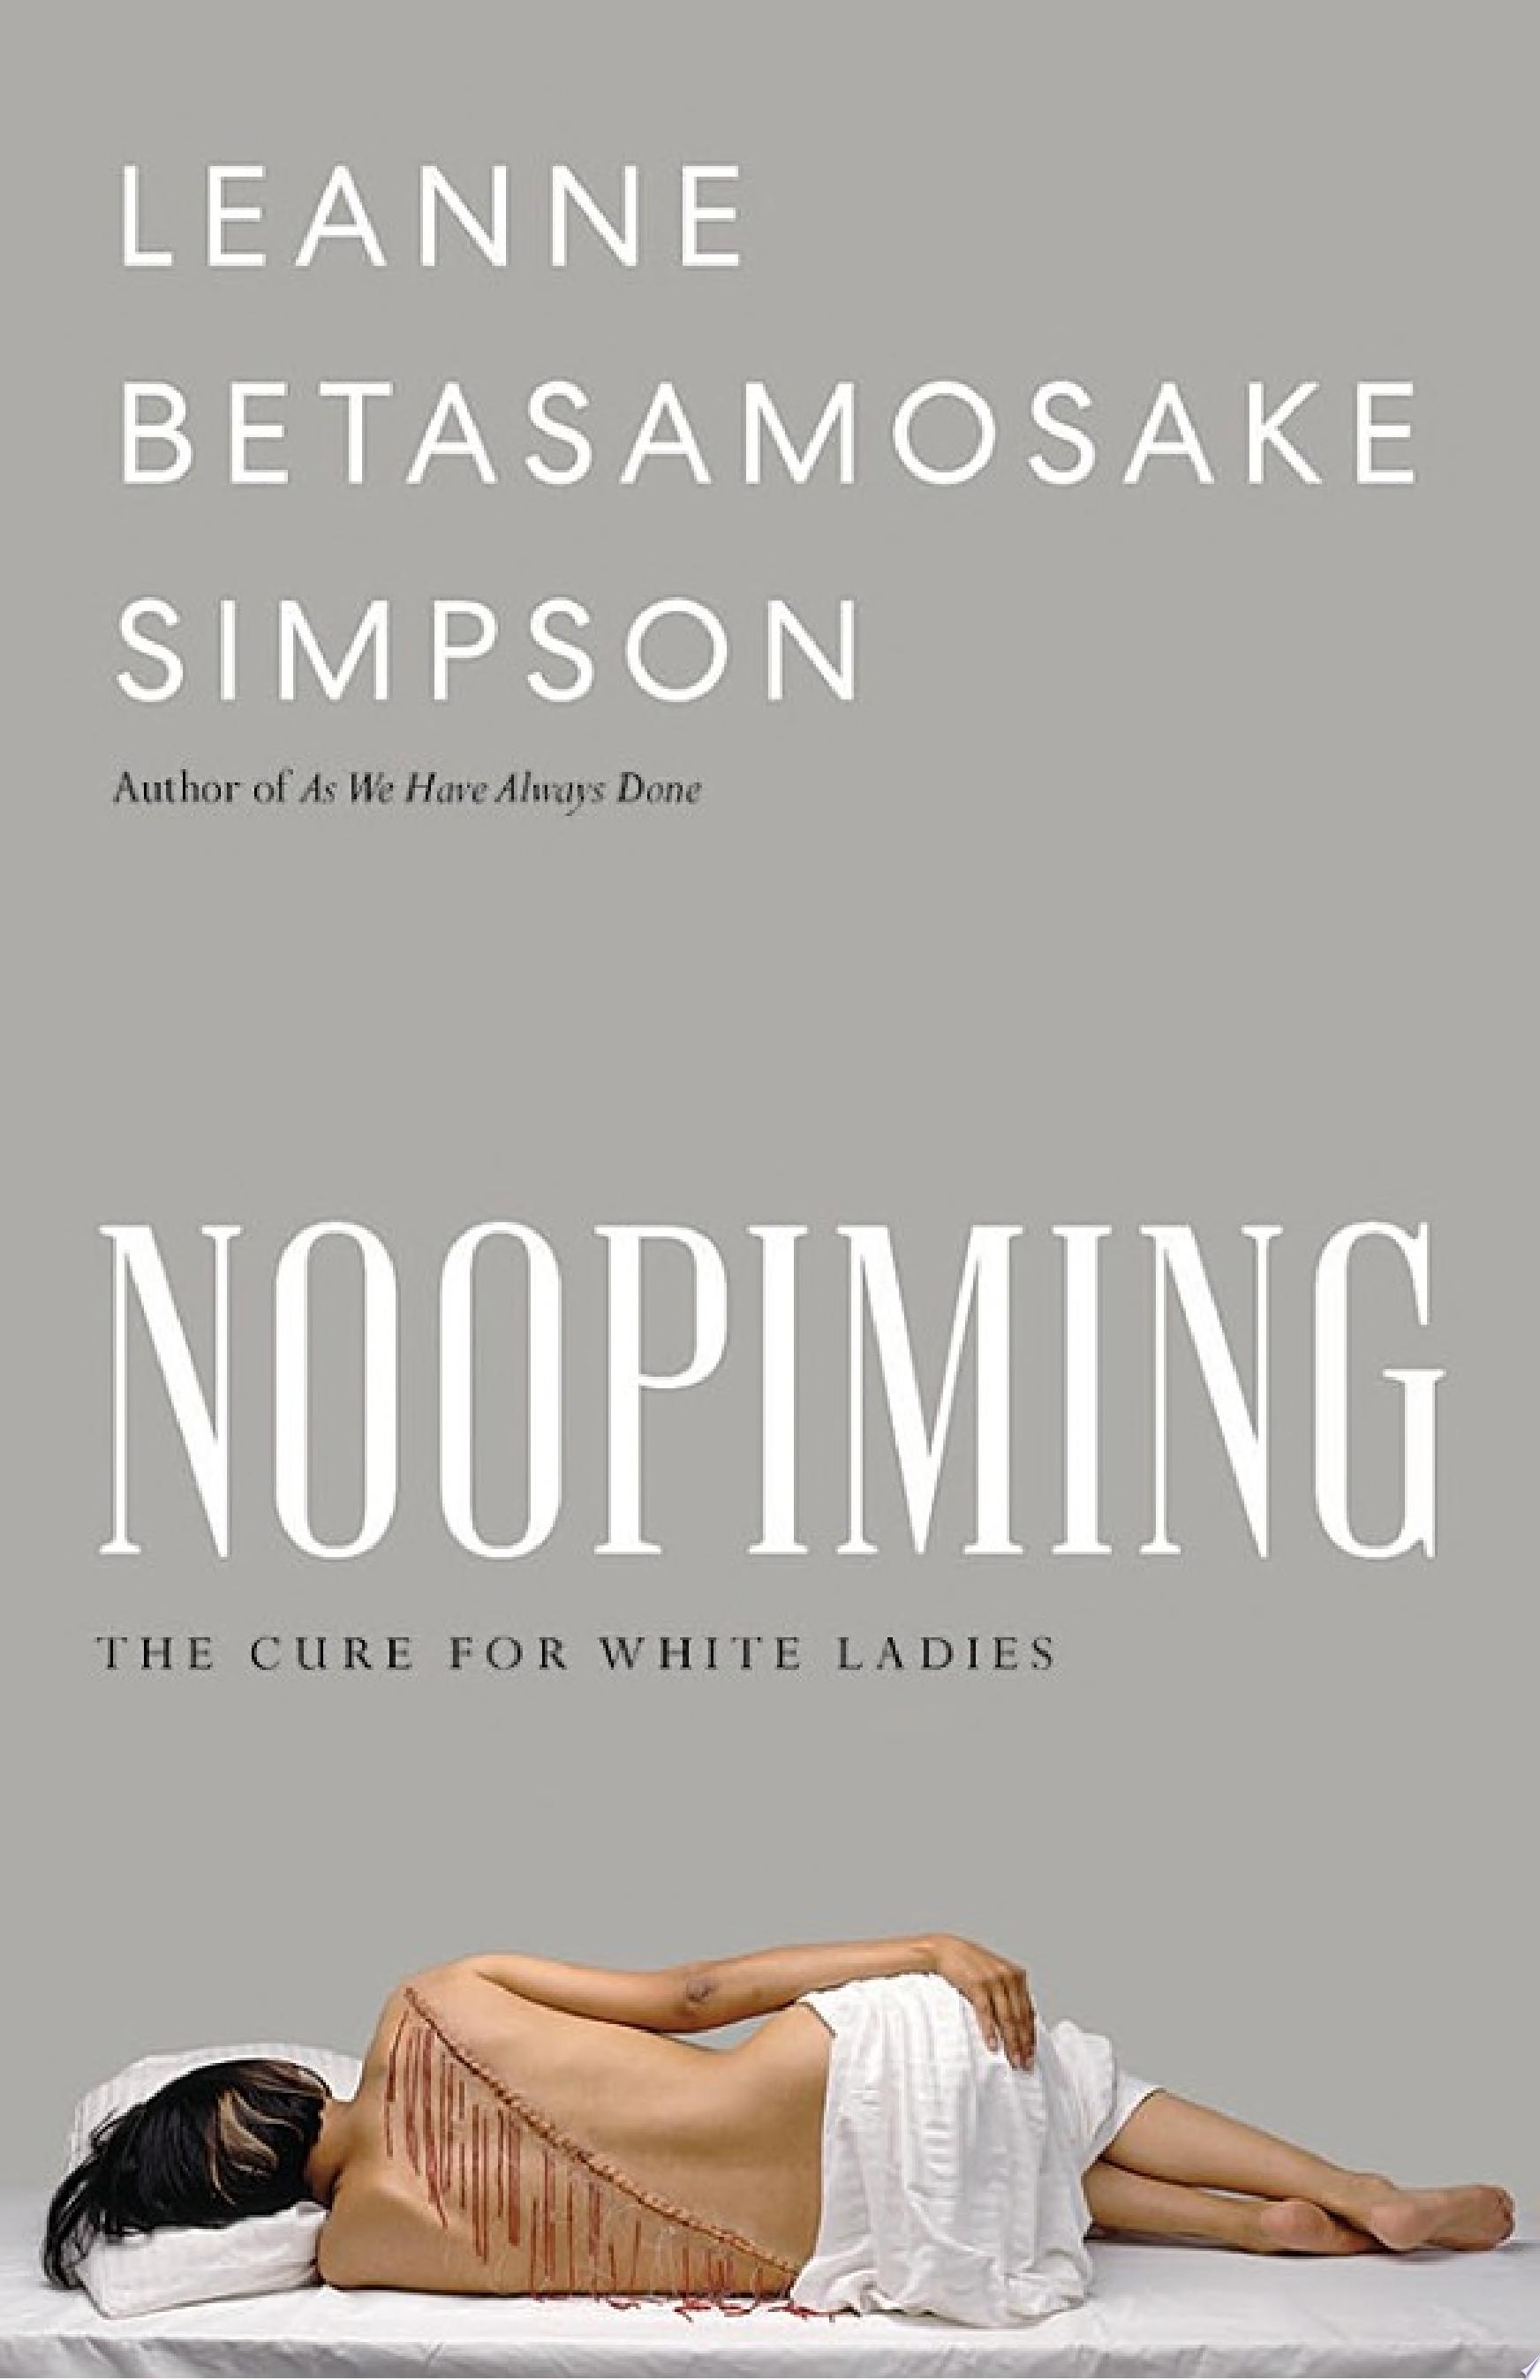 Image for "Noopiming"